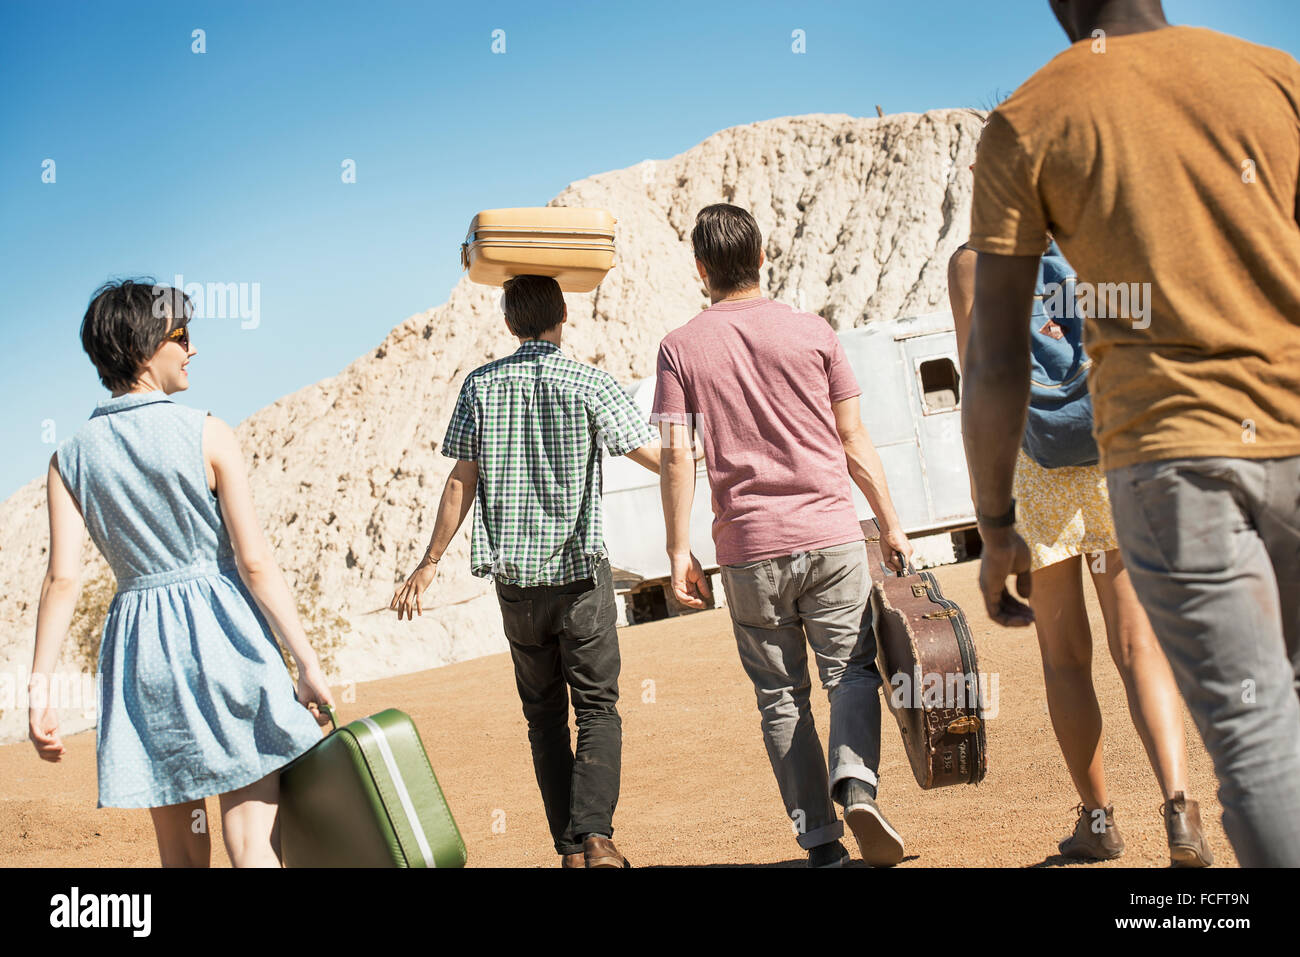 A group of people walking in a line in open desert country, carrying their cases, on a road trip. Stock Photo